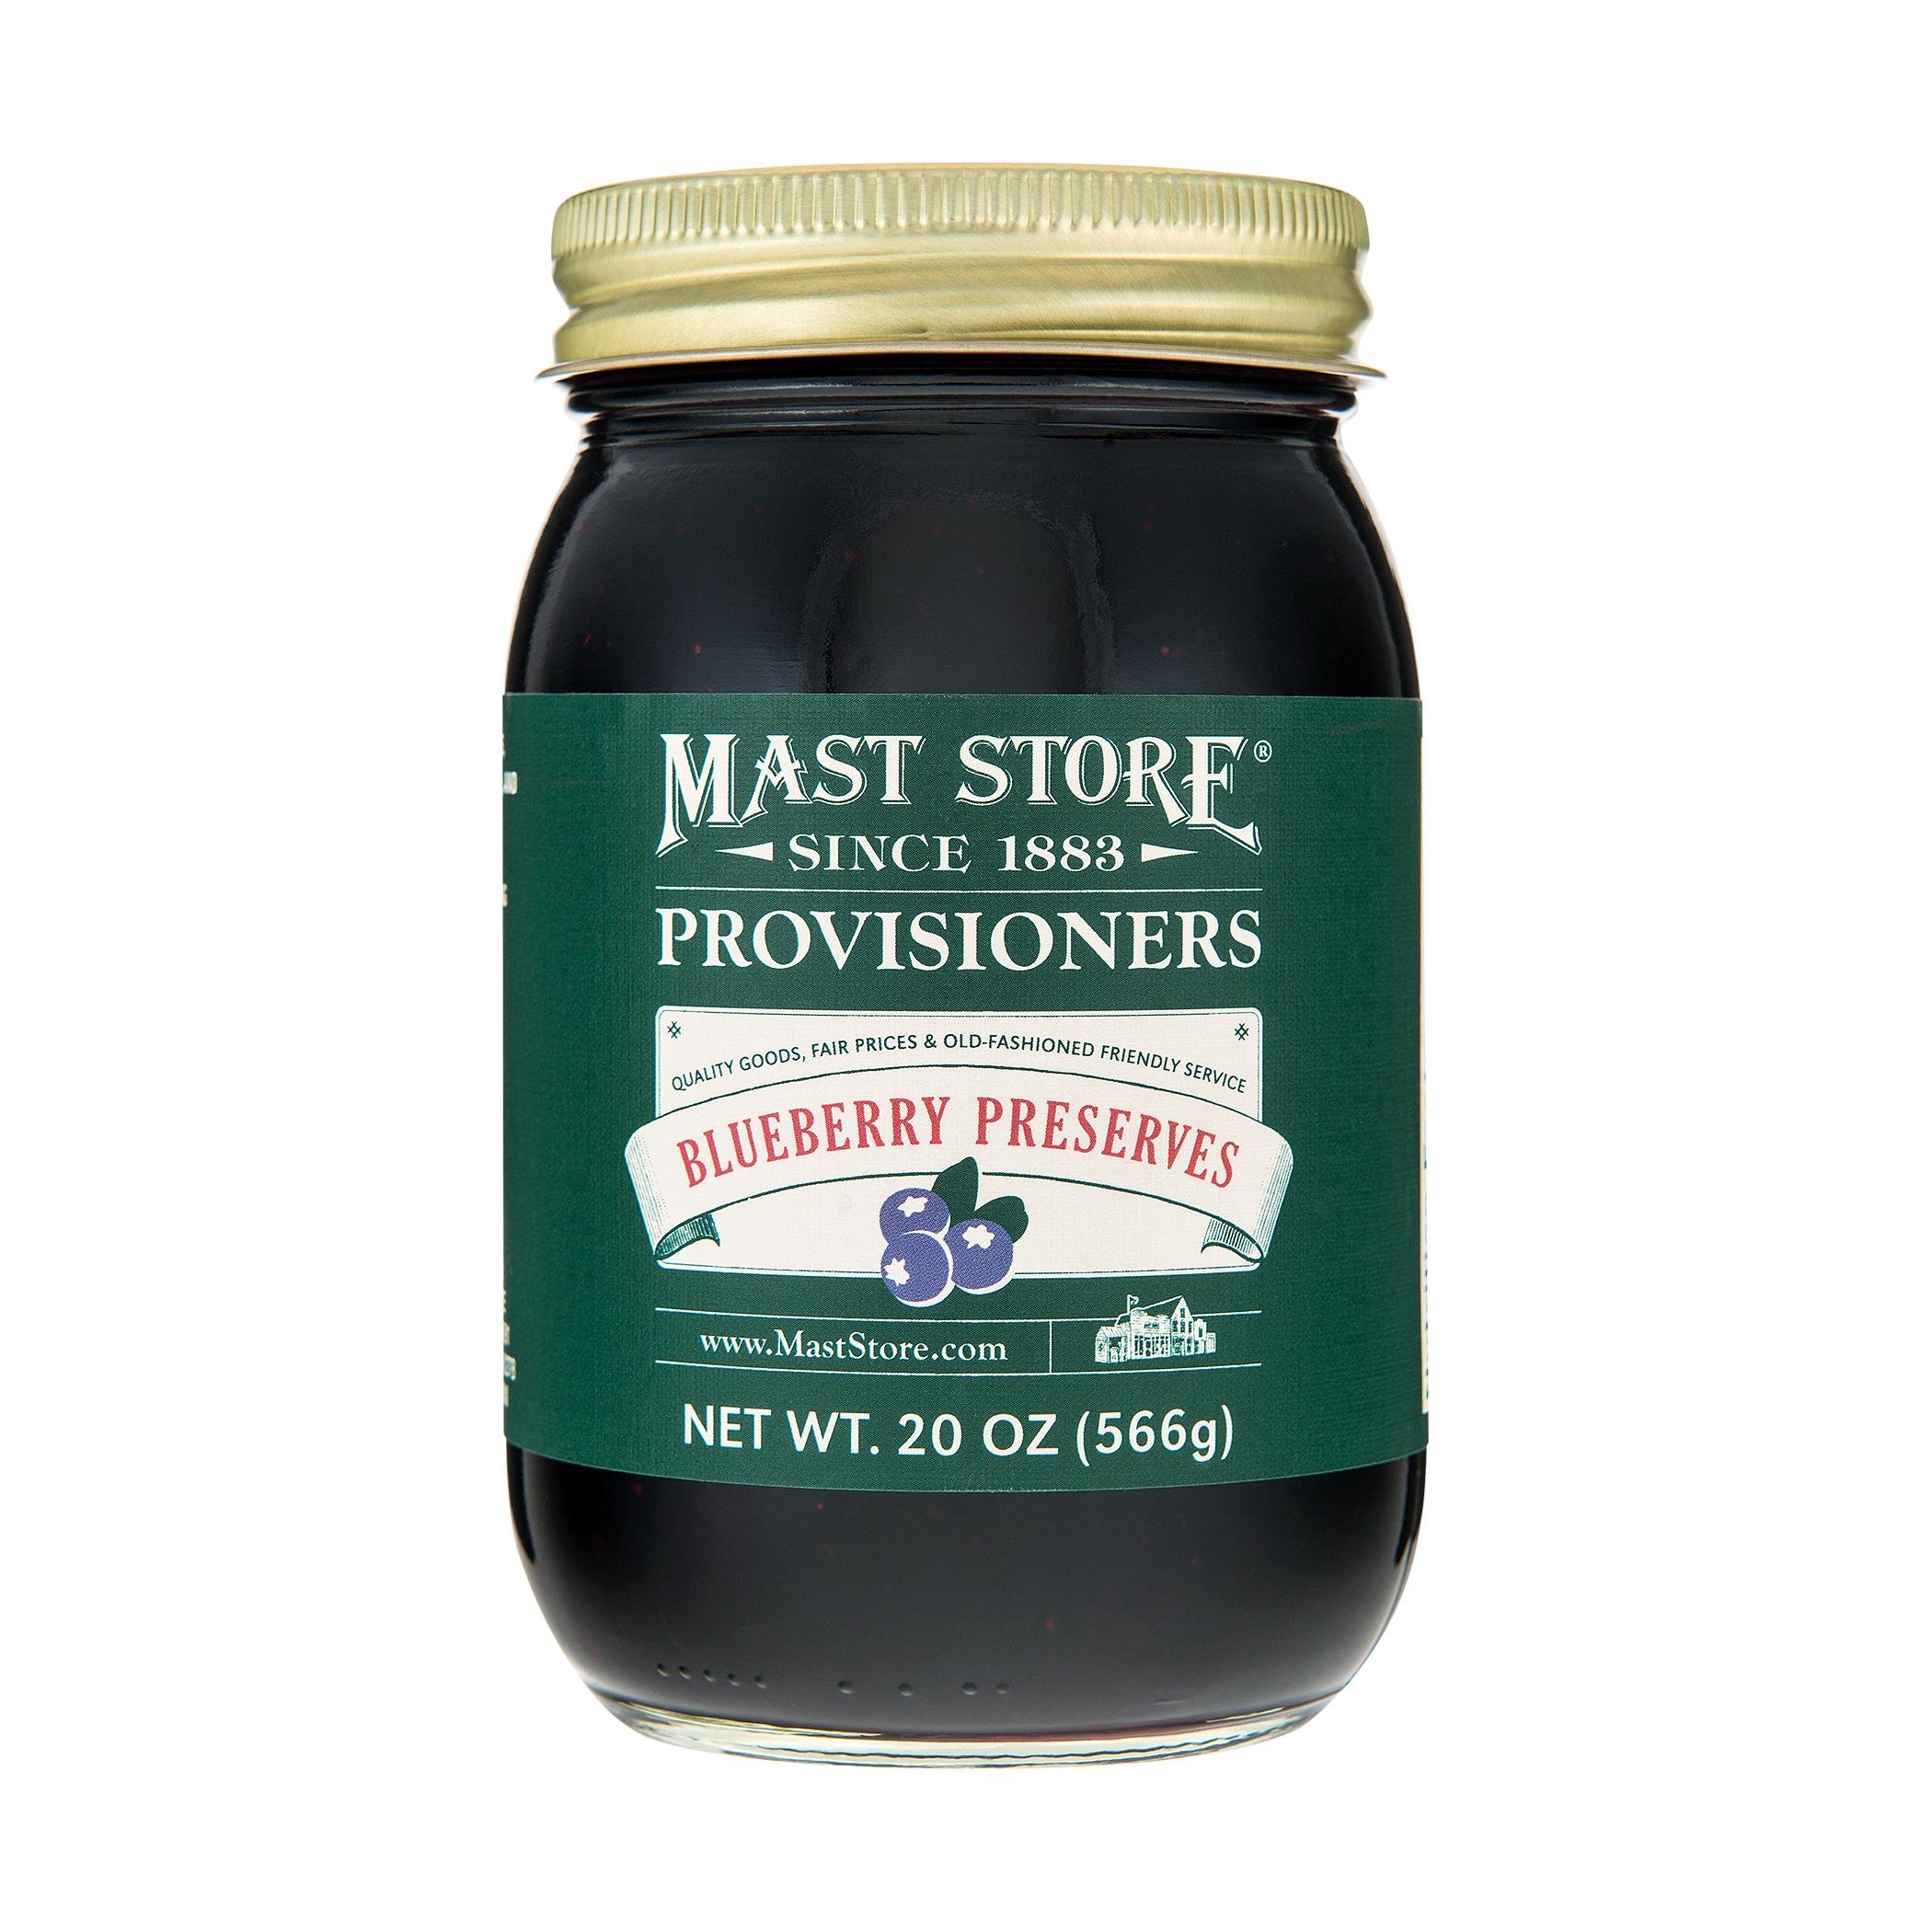  Mast Store Provisioners Blueberry Preserves